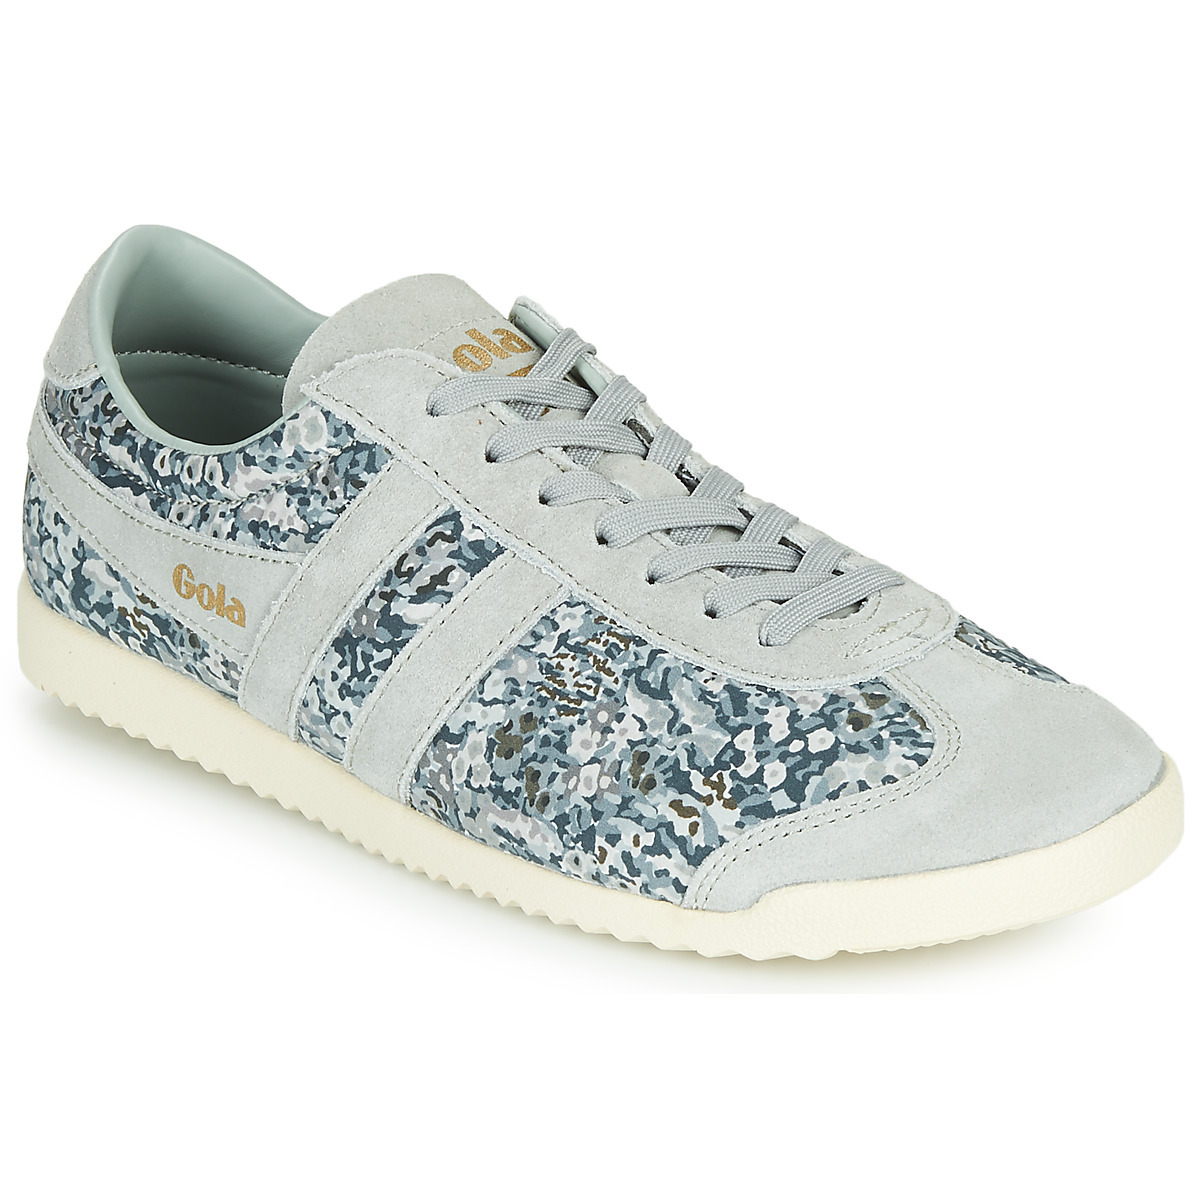 Gola Sneakers Grey for Women by Spartoo GOOFASH